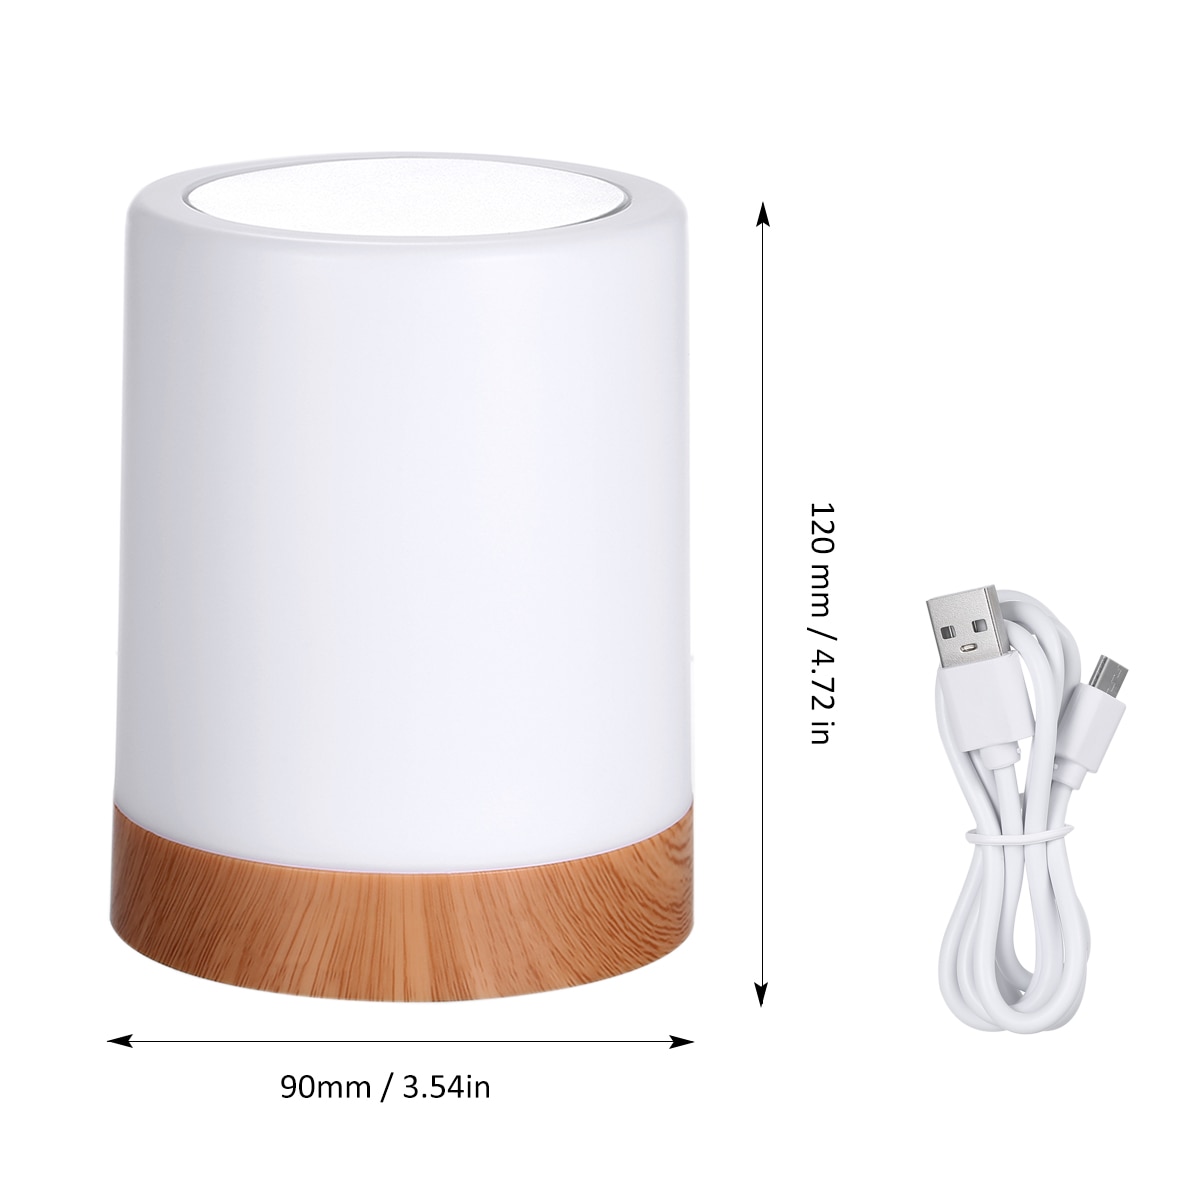 USB Rechargeable Touching Control Bedside Light Dimmable Table Lamp Warm White & RGB Night Light for Living Room Bedrooms Office